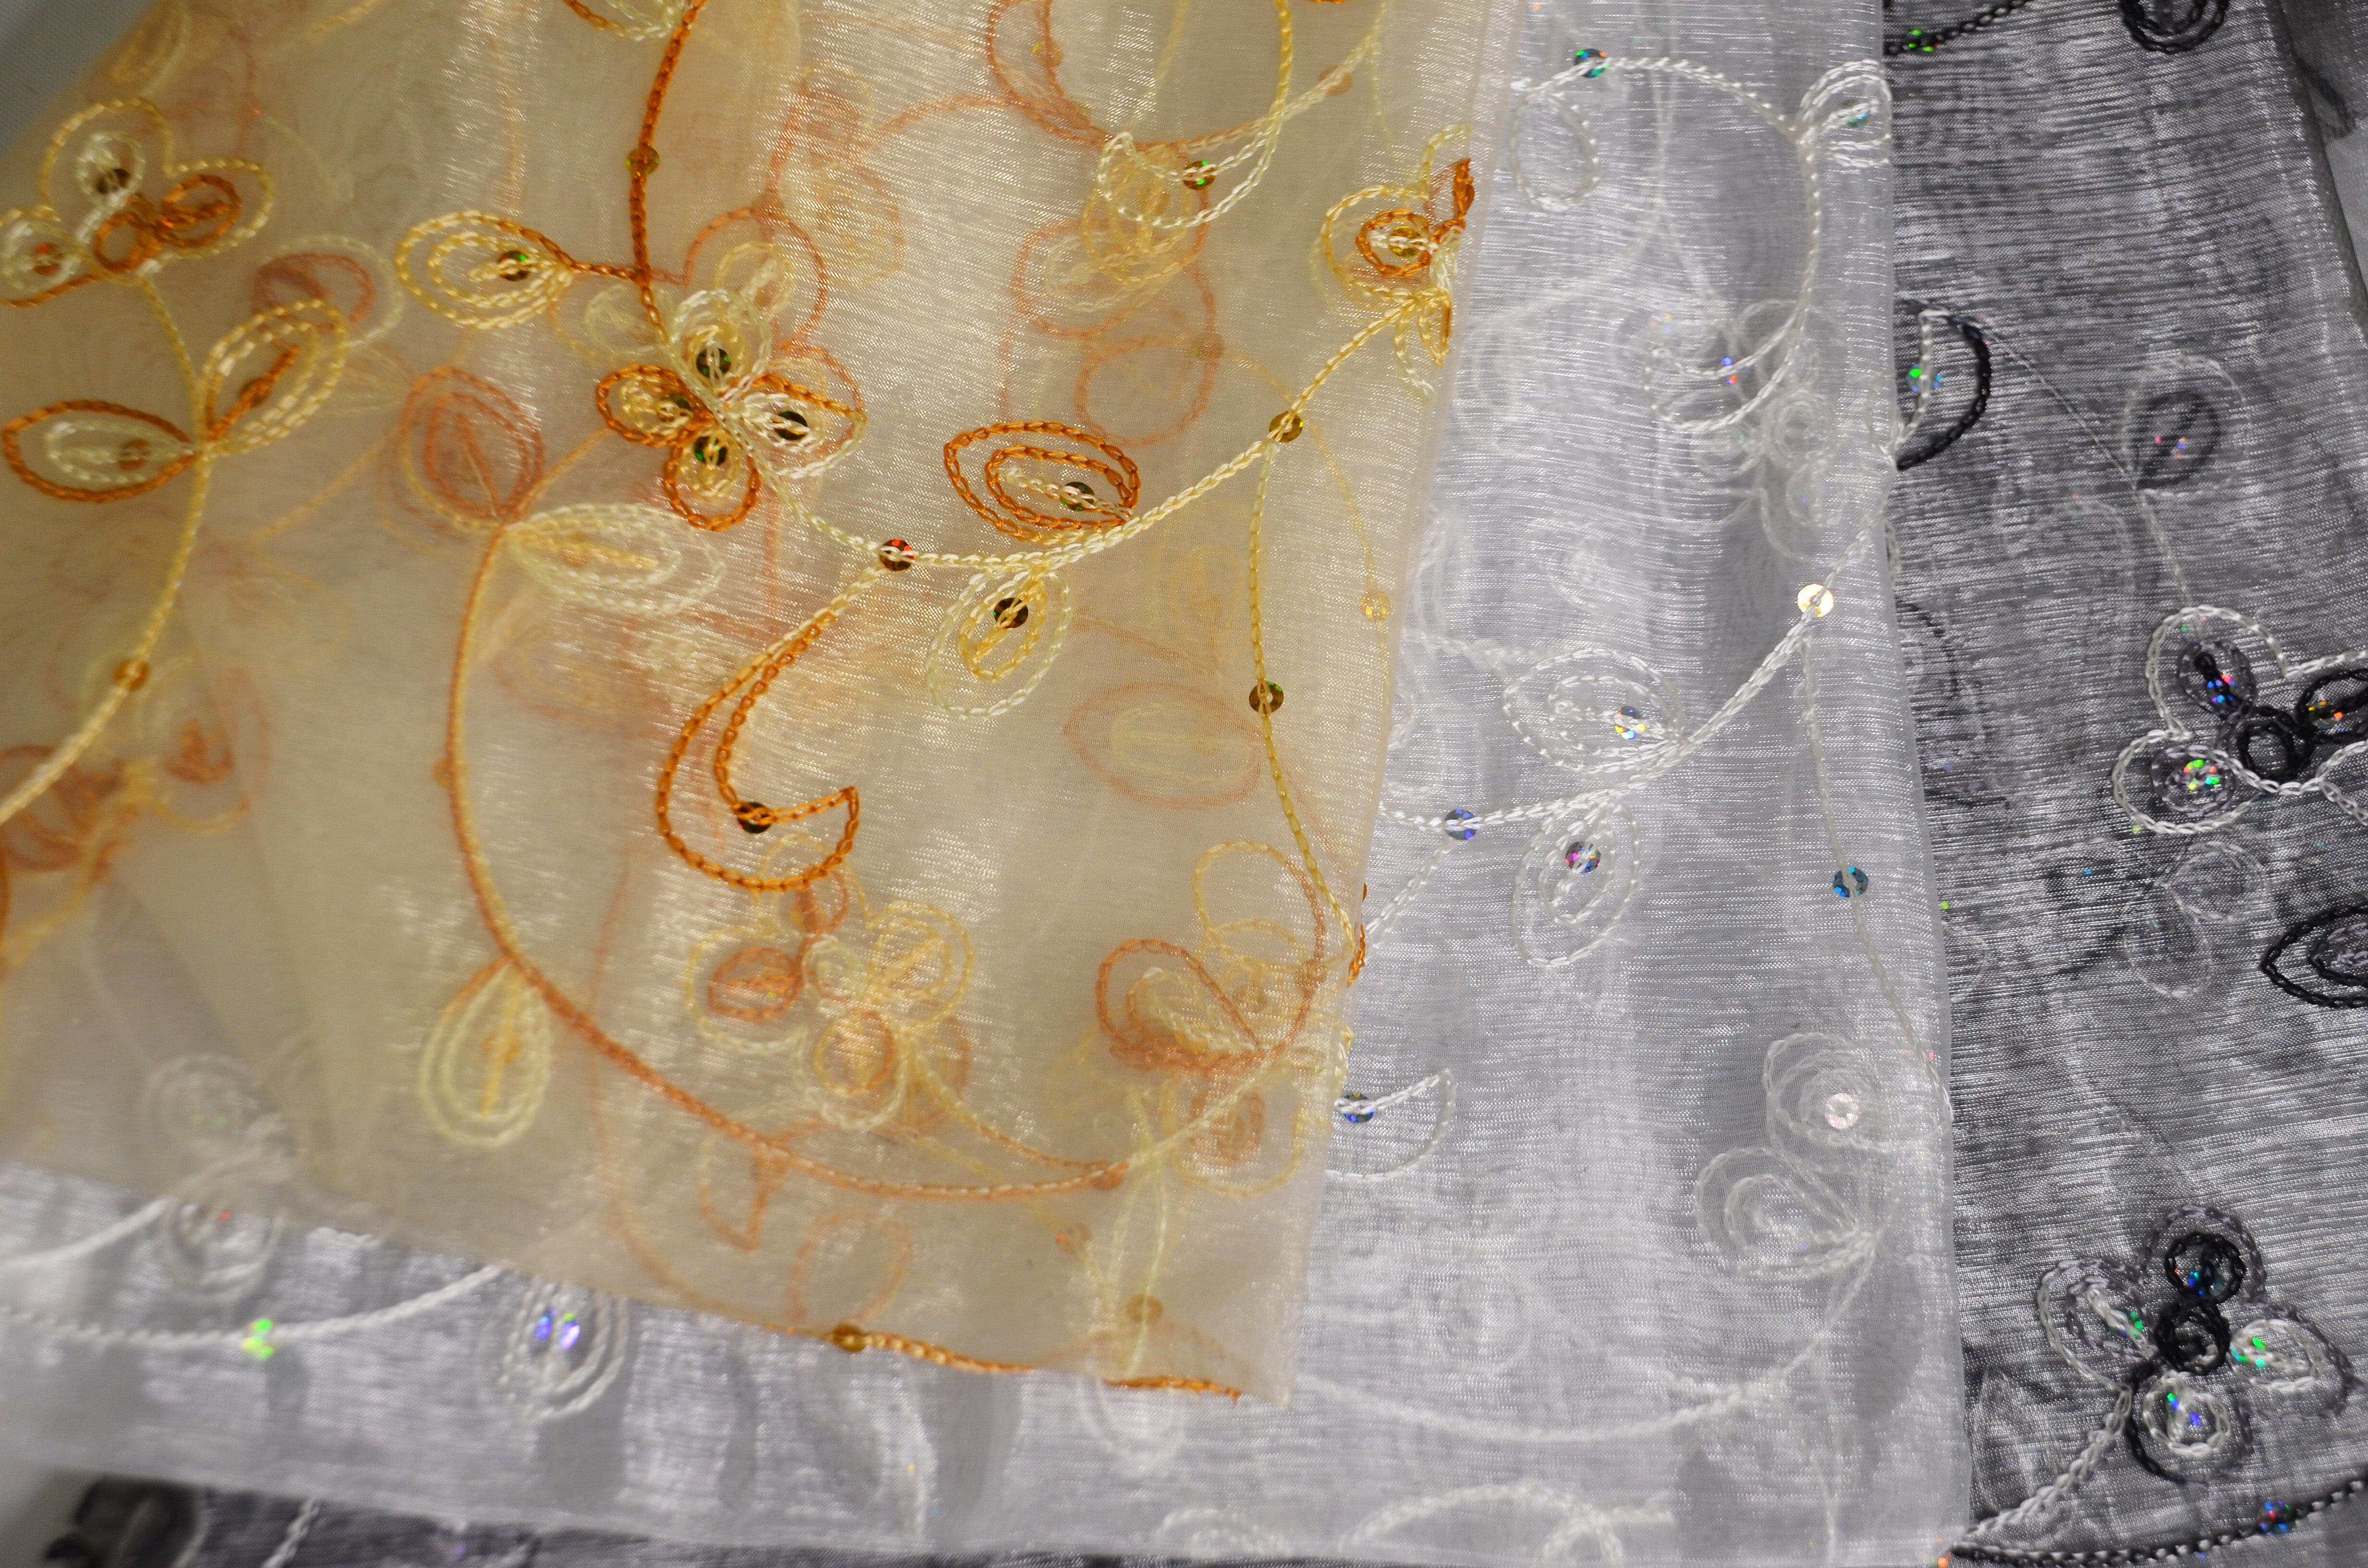 Embroidered Fabric made with thread embroidery on a cotton voile fabric